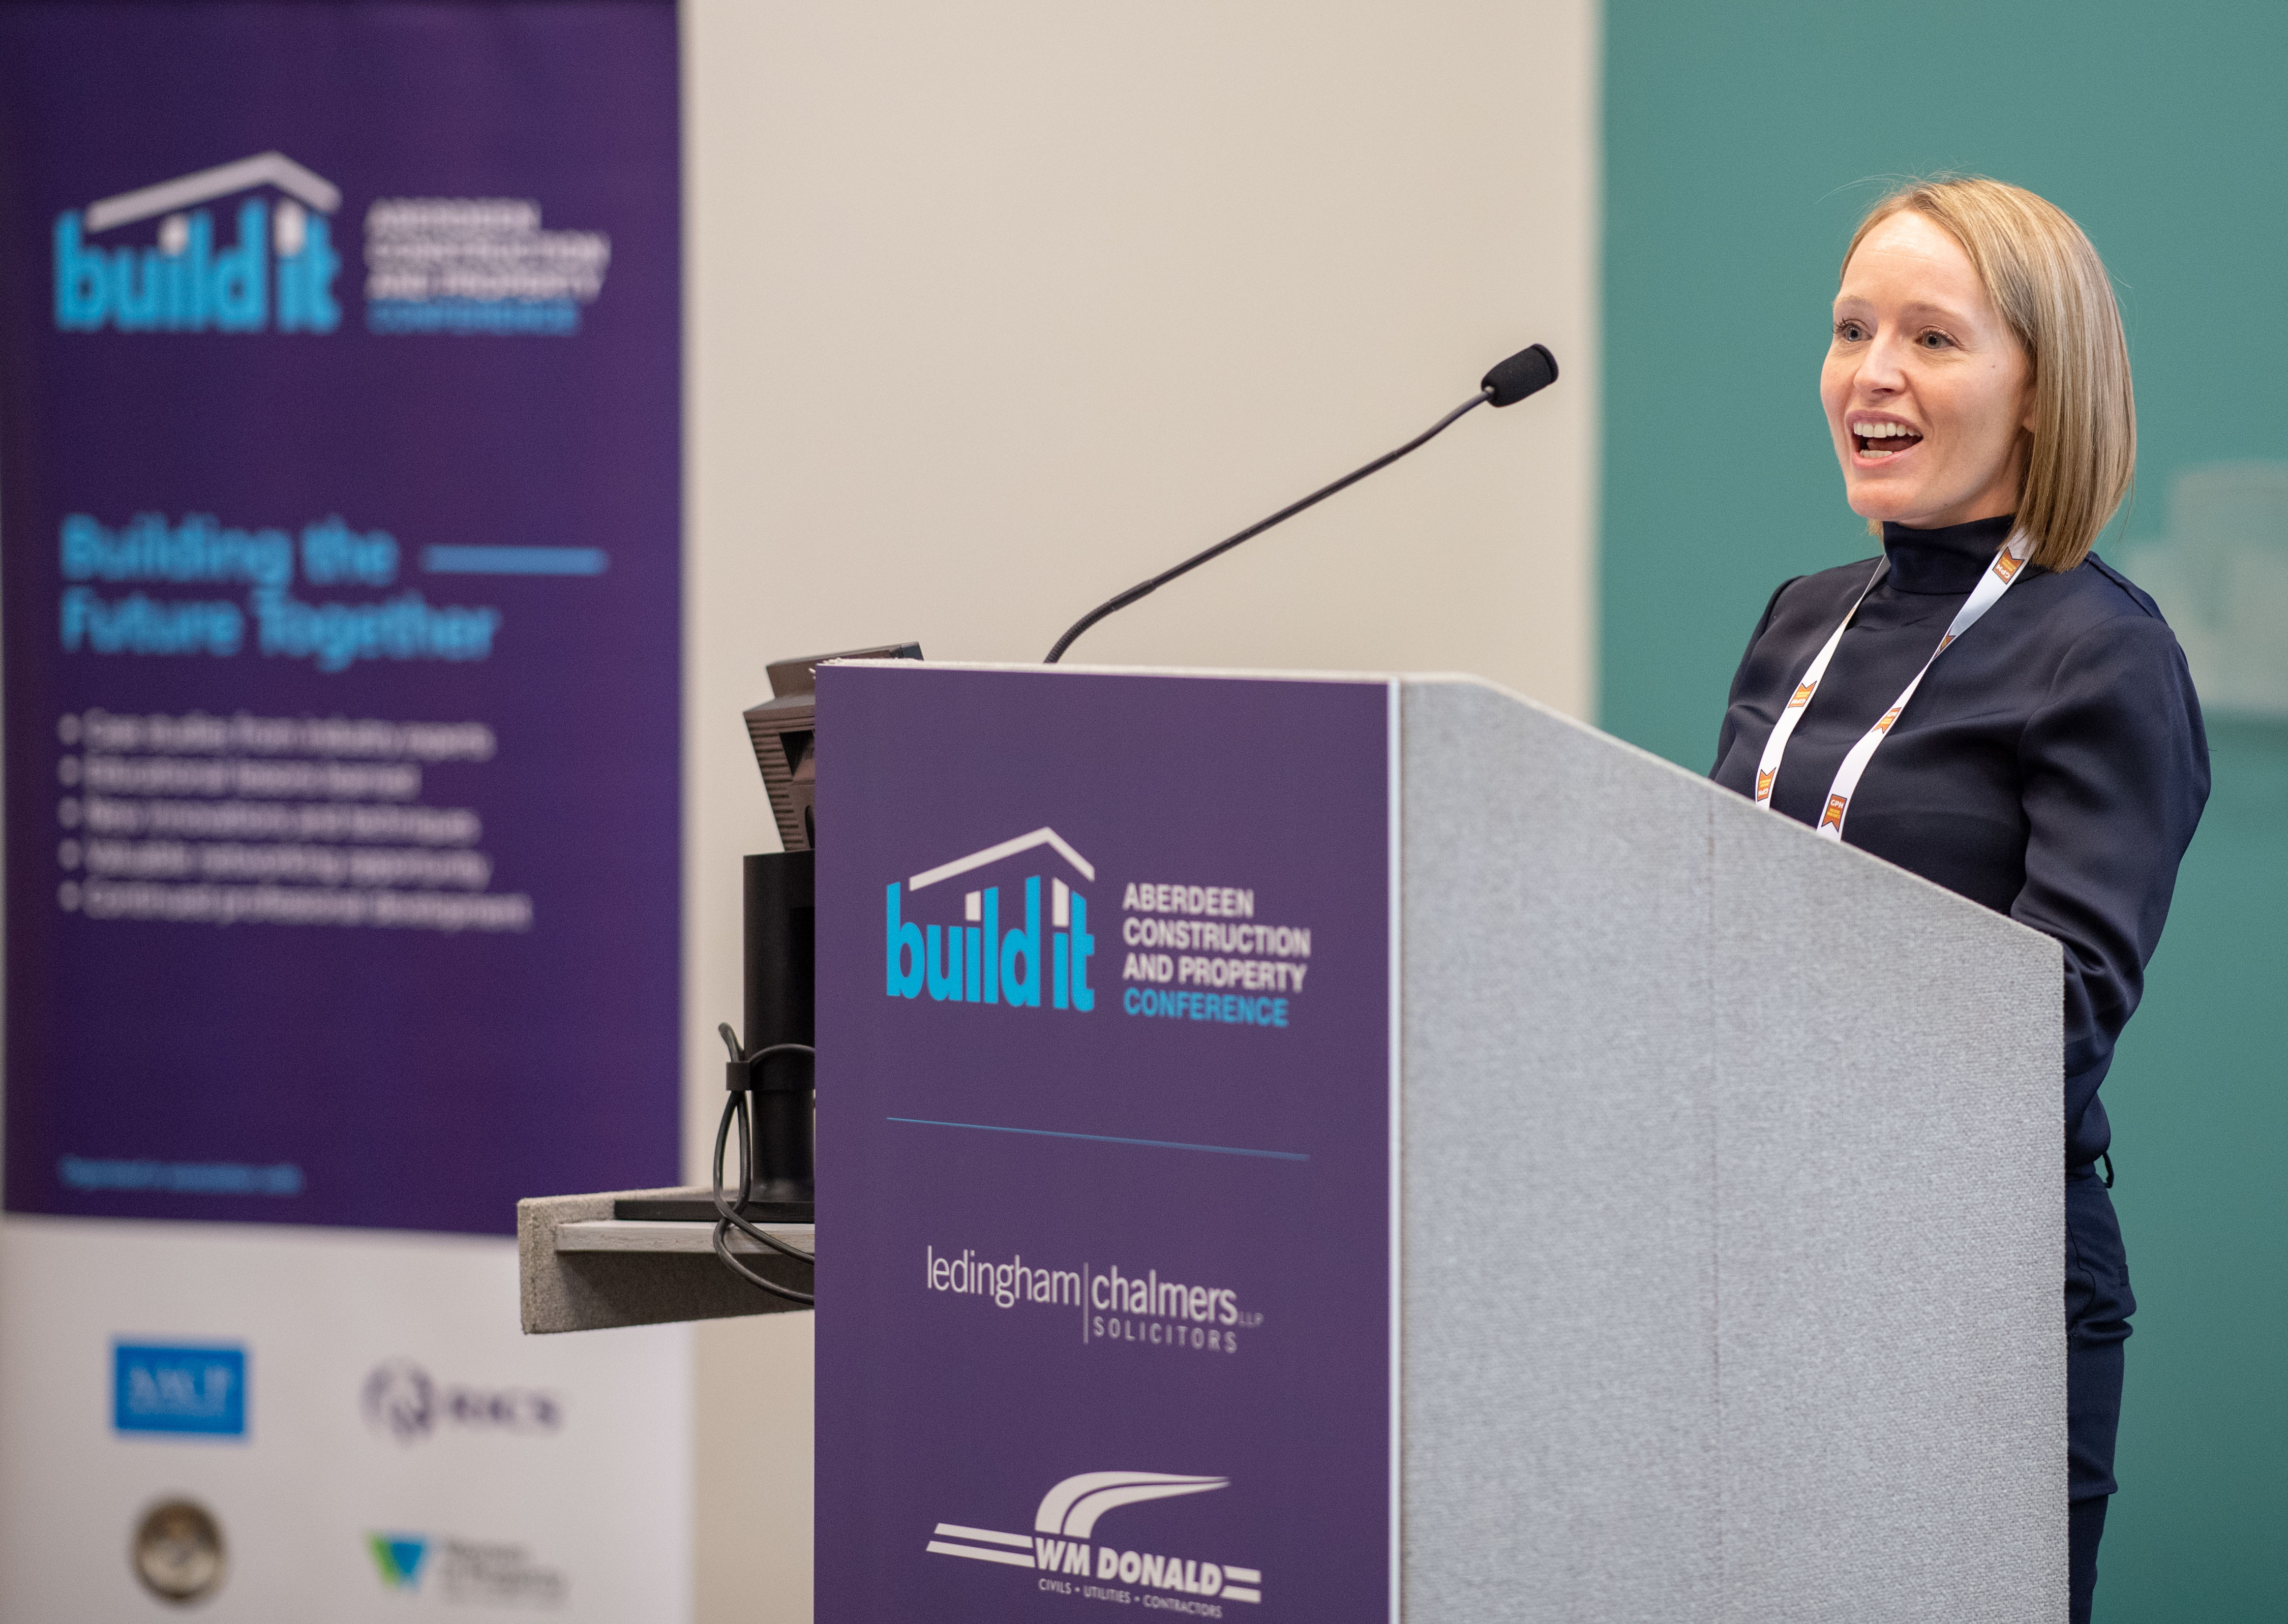 Aberdeen , Scotland, Monday, 3 December 2018 


1st Aberdeen Construction and Property Conference Build it at AECC 



Picture by Abermedia / Michal Wachucik